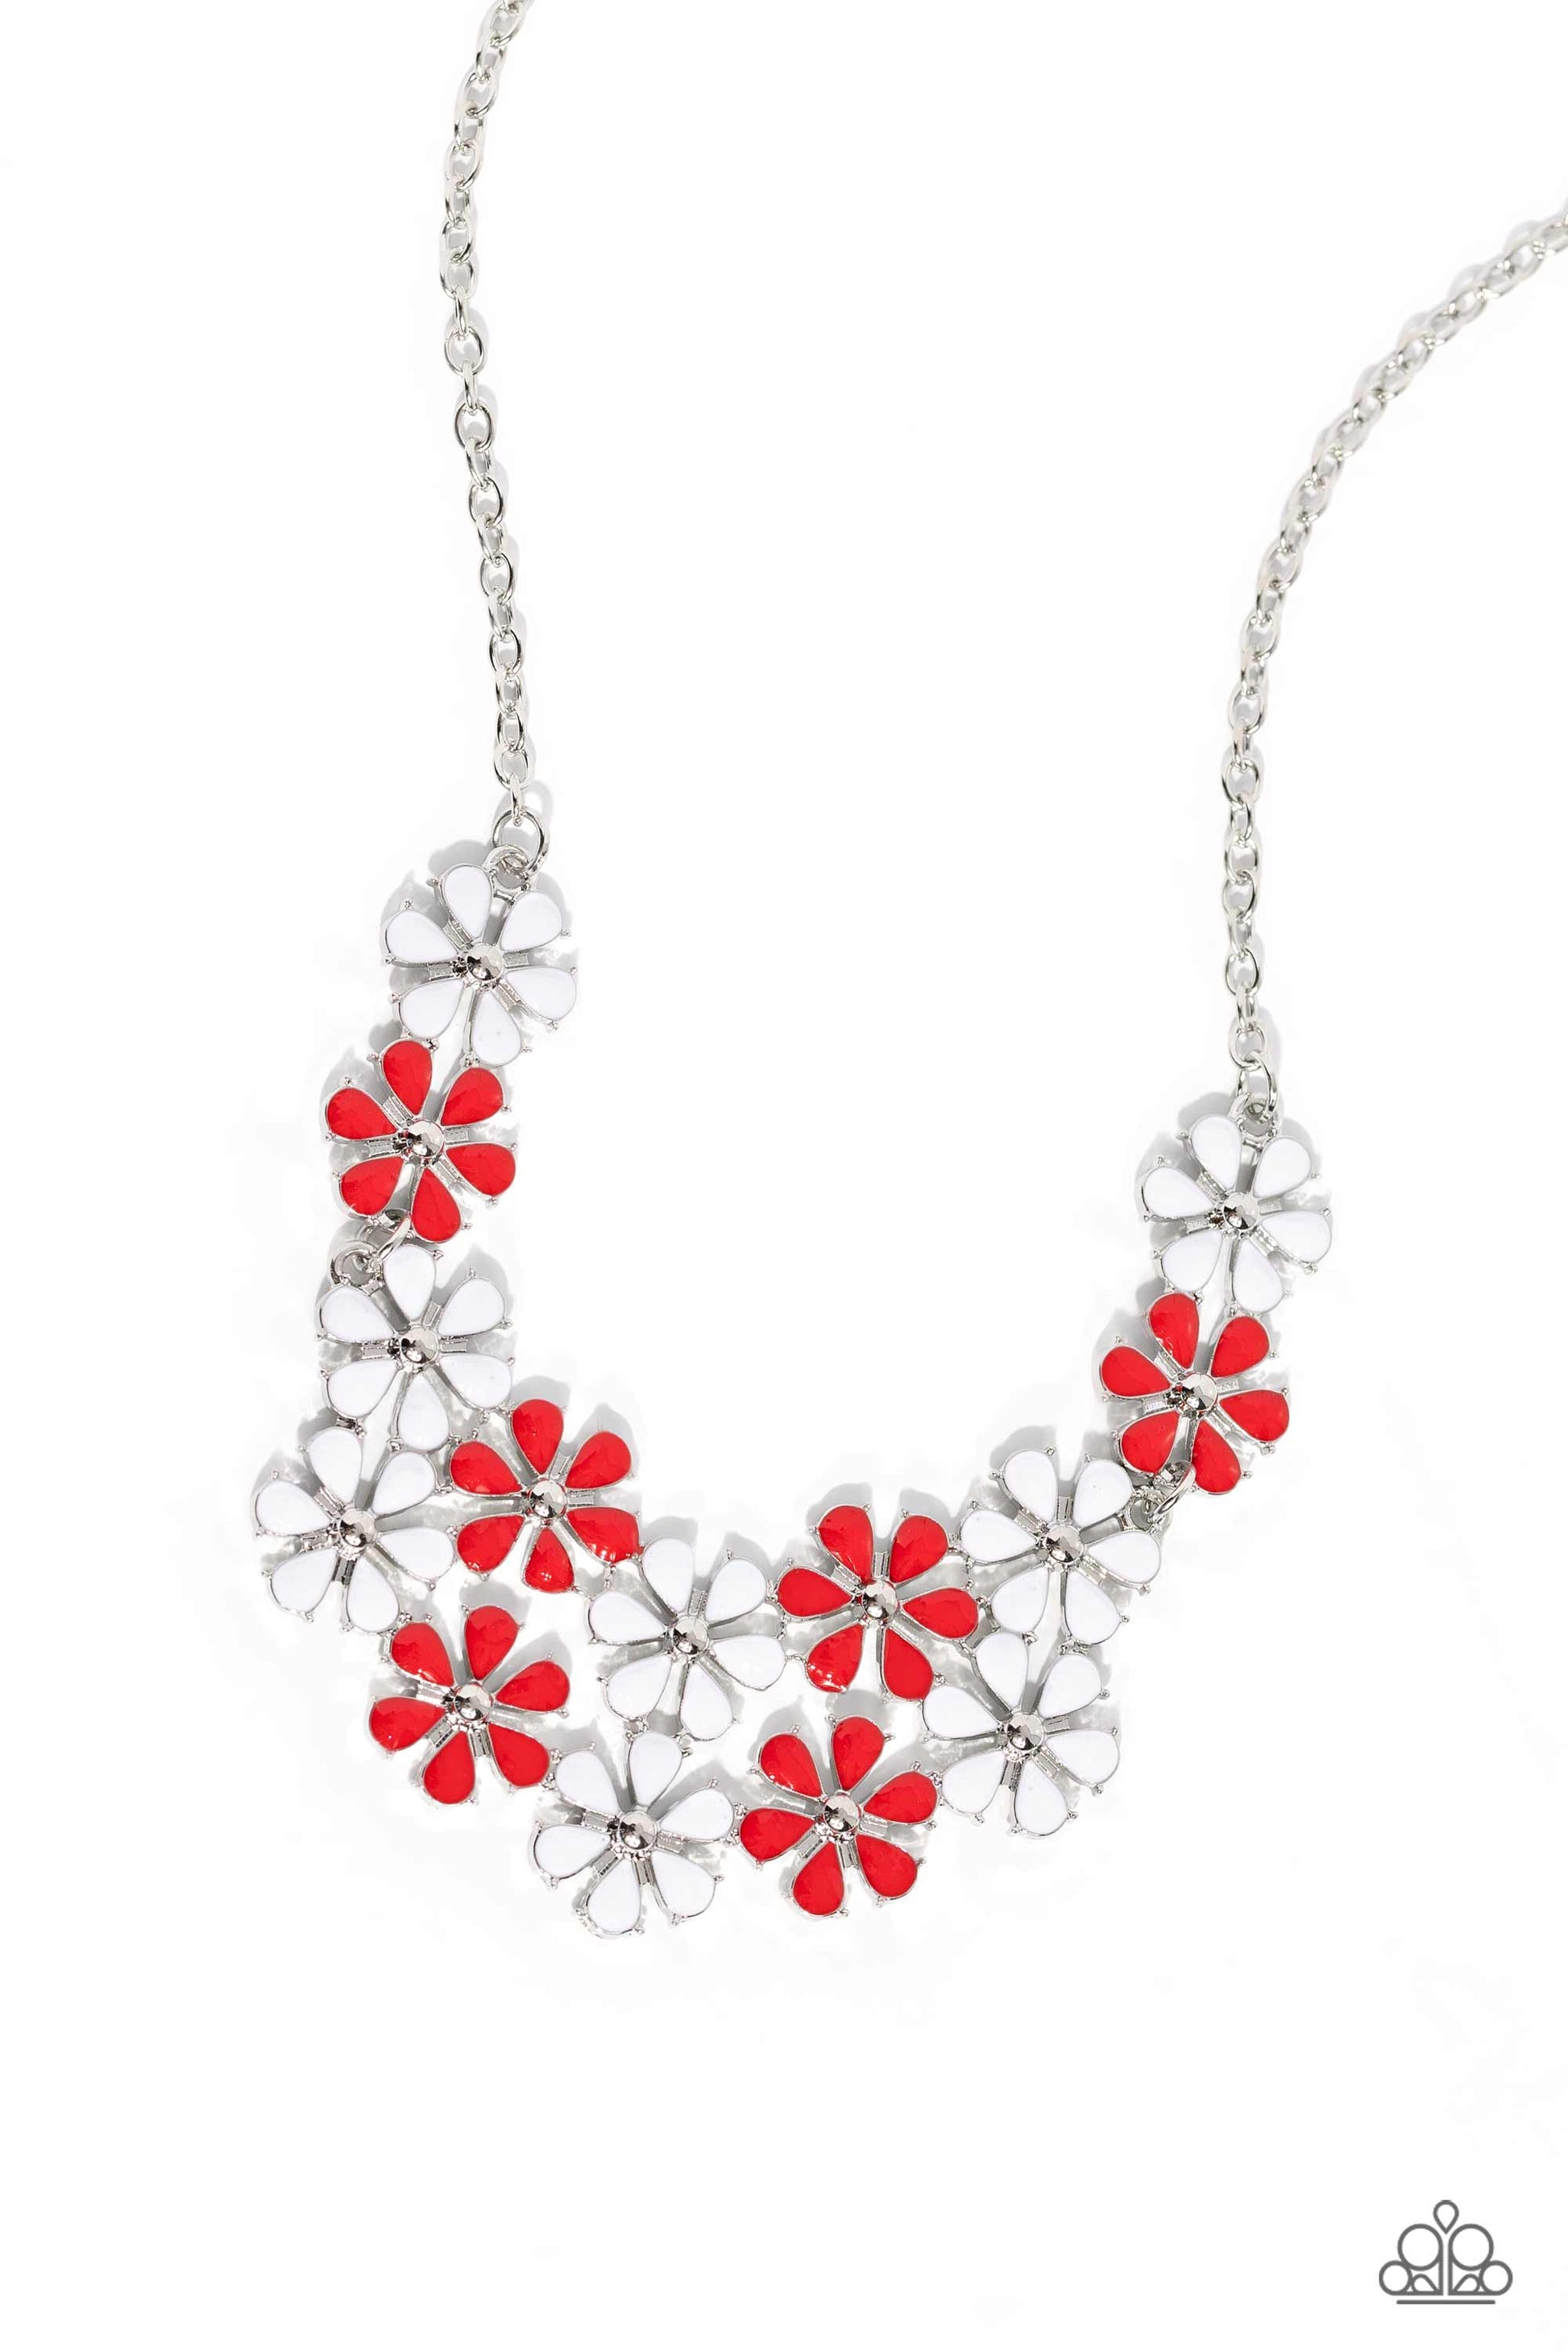 Paparazzi Accessories - Hey, SOL Sister - Red Necklace